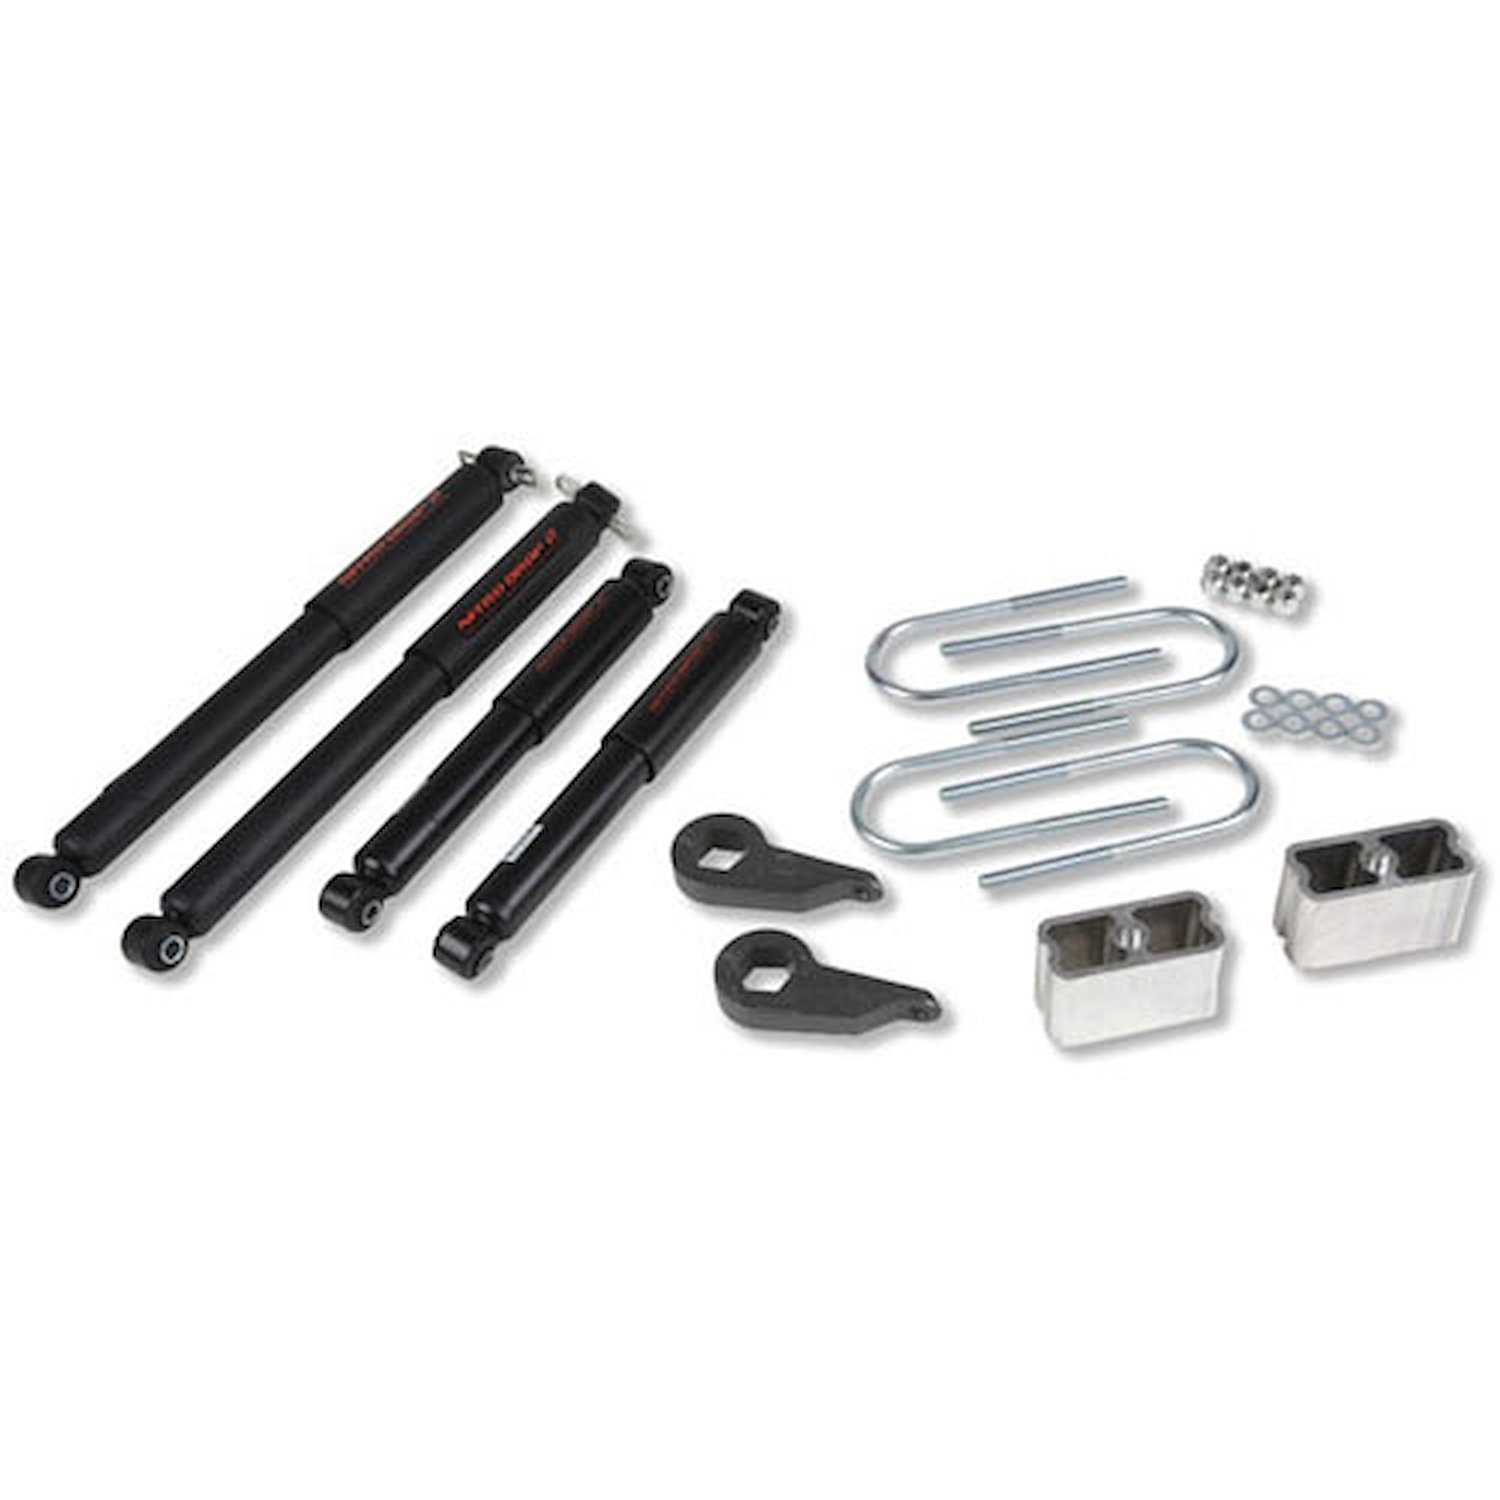 Complete Lowering Kit for 1982-1997 Chevy S10/GMC S15